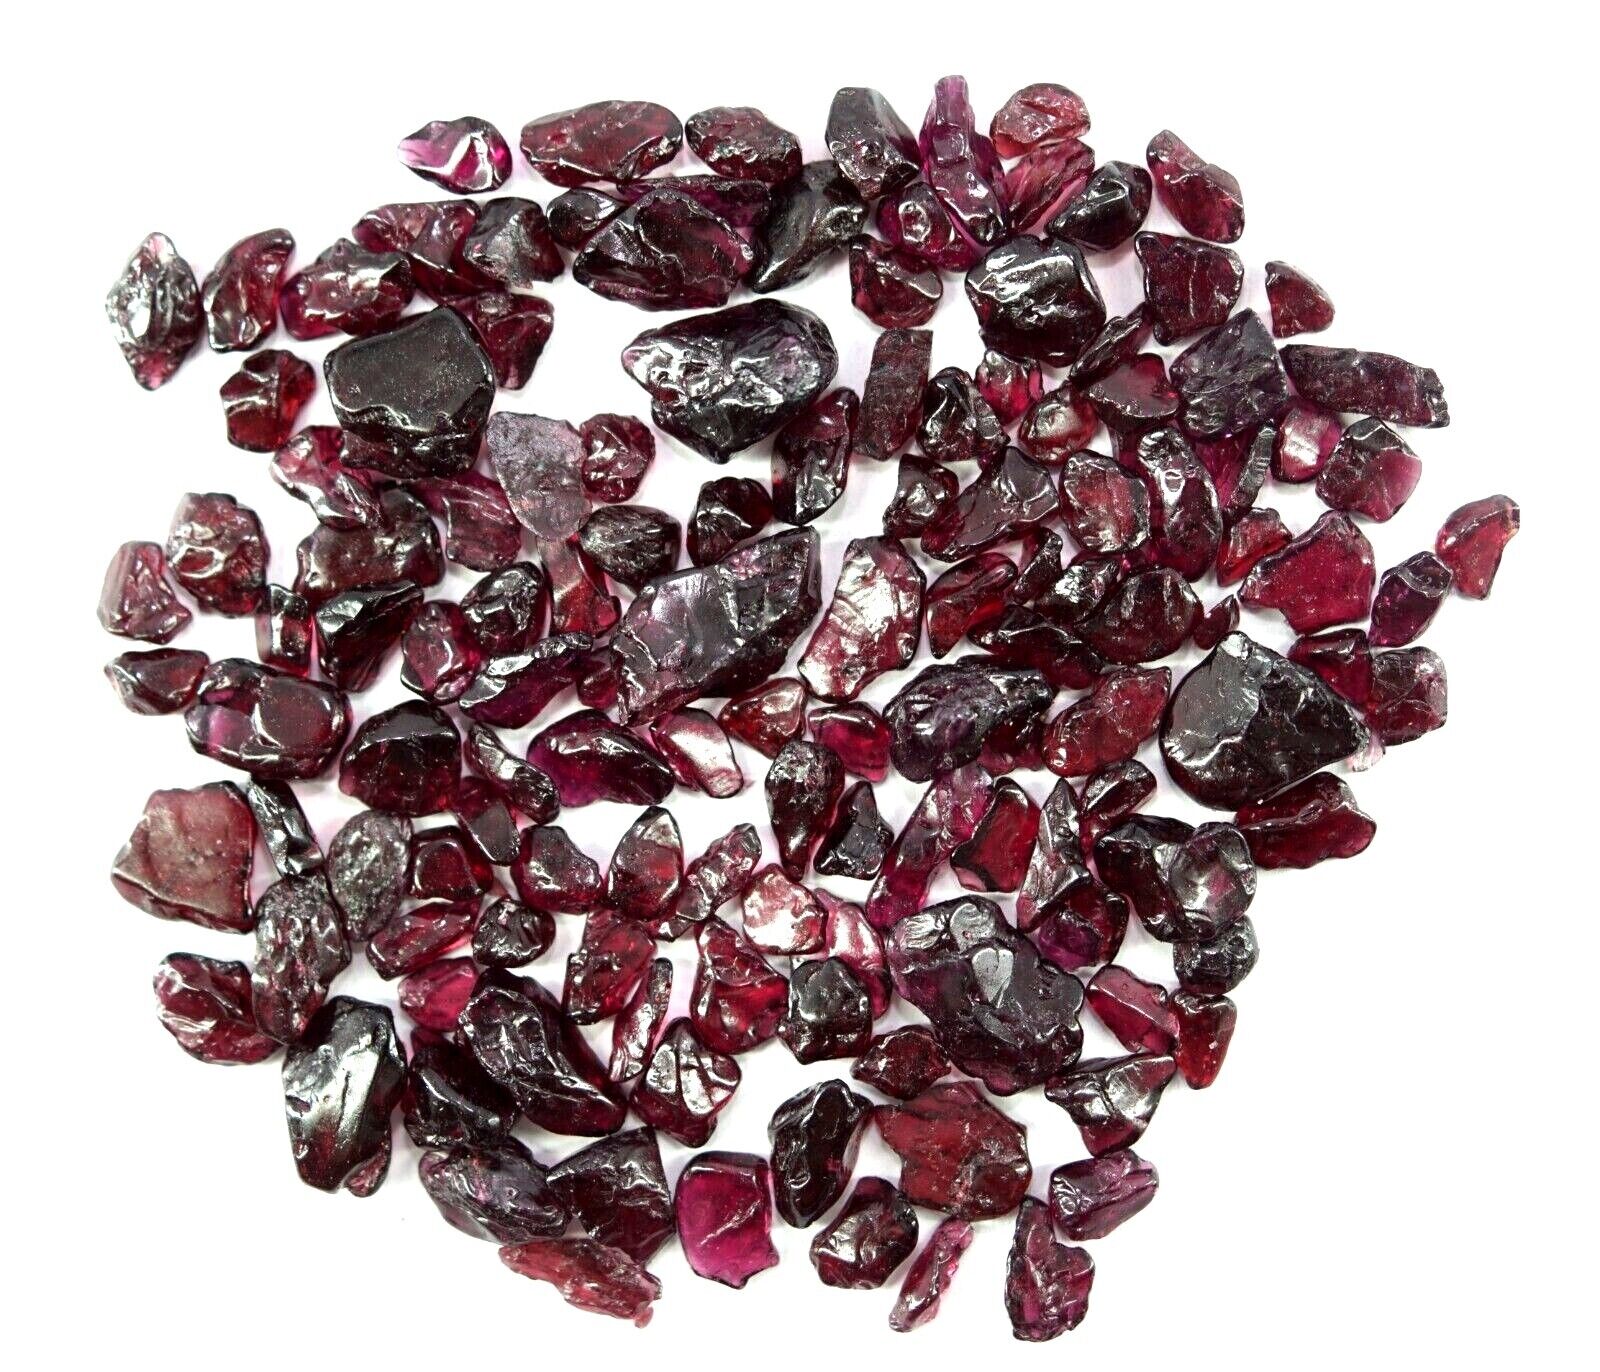 2500 Ct EGL Certified Tanzanian Natural Crystal Red Ruby Rough Untreated Lot